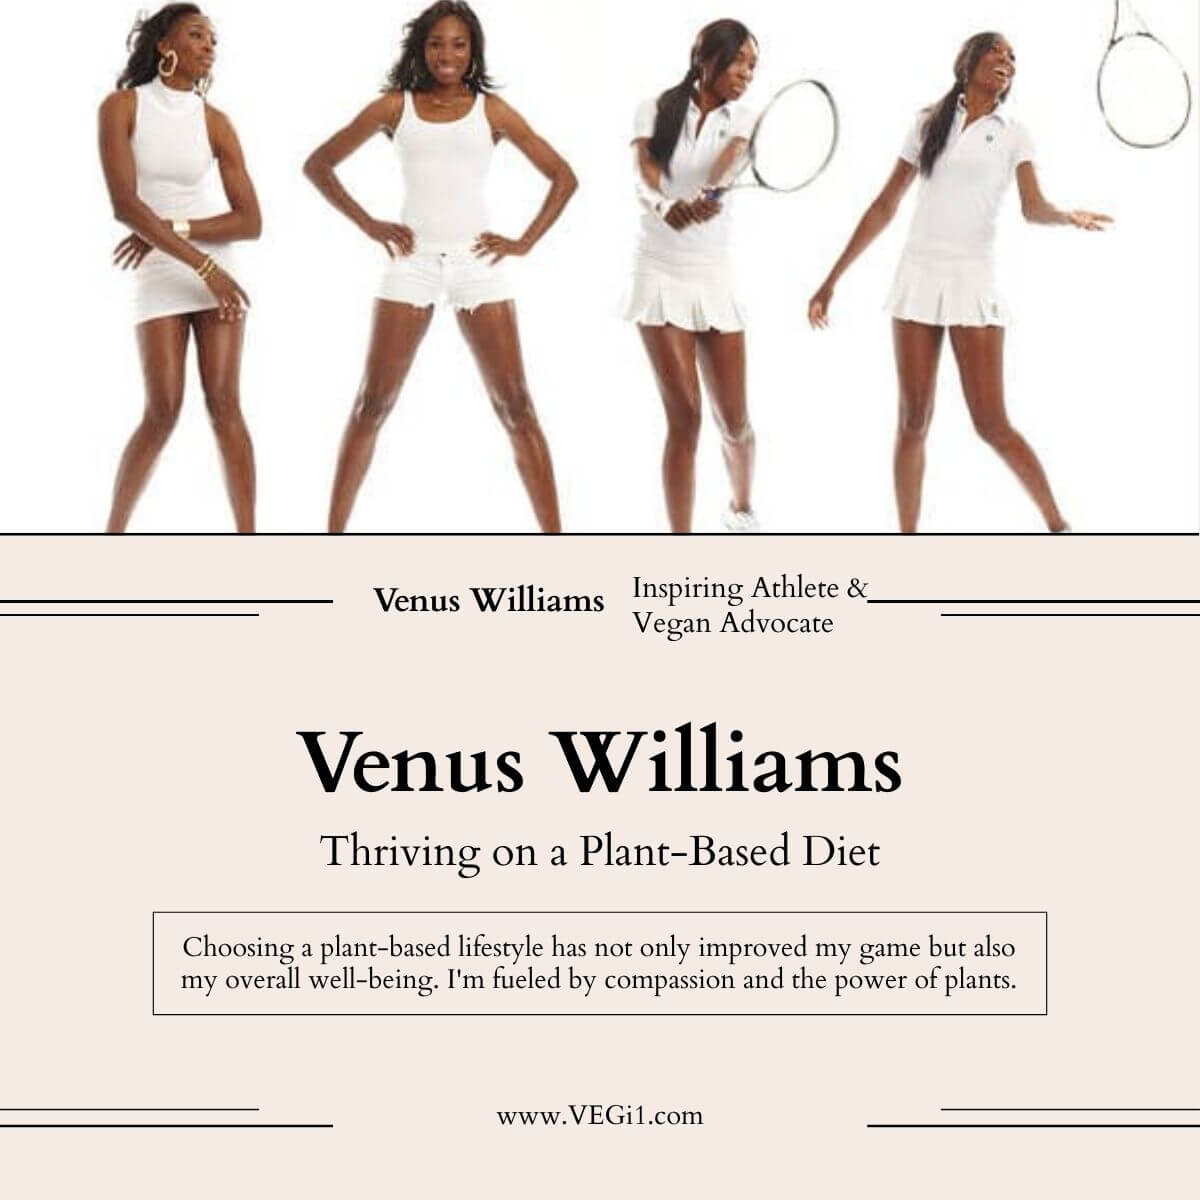 Is venus williams a vegetarian ?Venus Williams: Choosing a plant-based lifestyle has not only improved my game but also my overall well-being. I'm fueled by compassion and the power of plants.